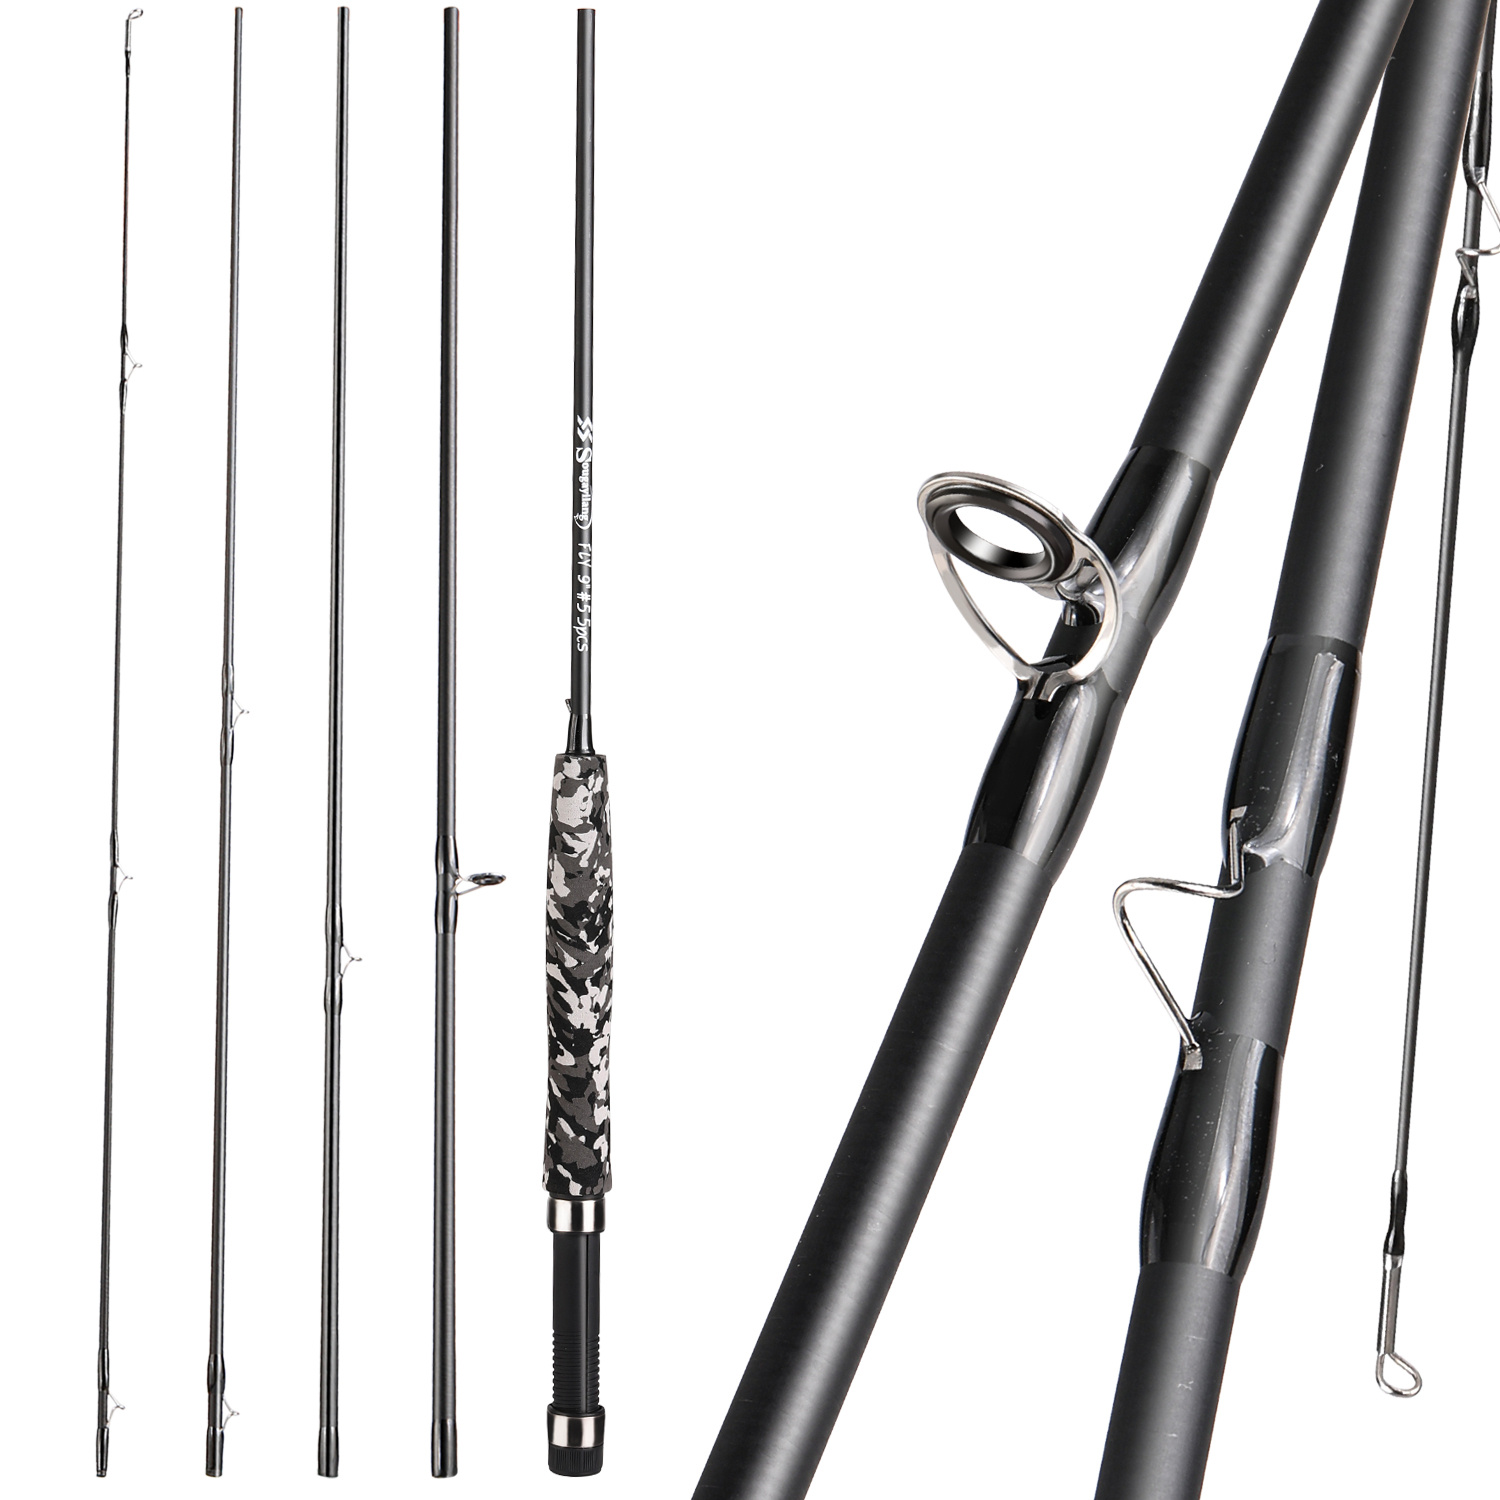 Visionaledge on X: A typical fishing rod is made of carbon fiber